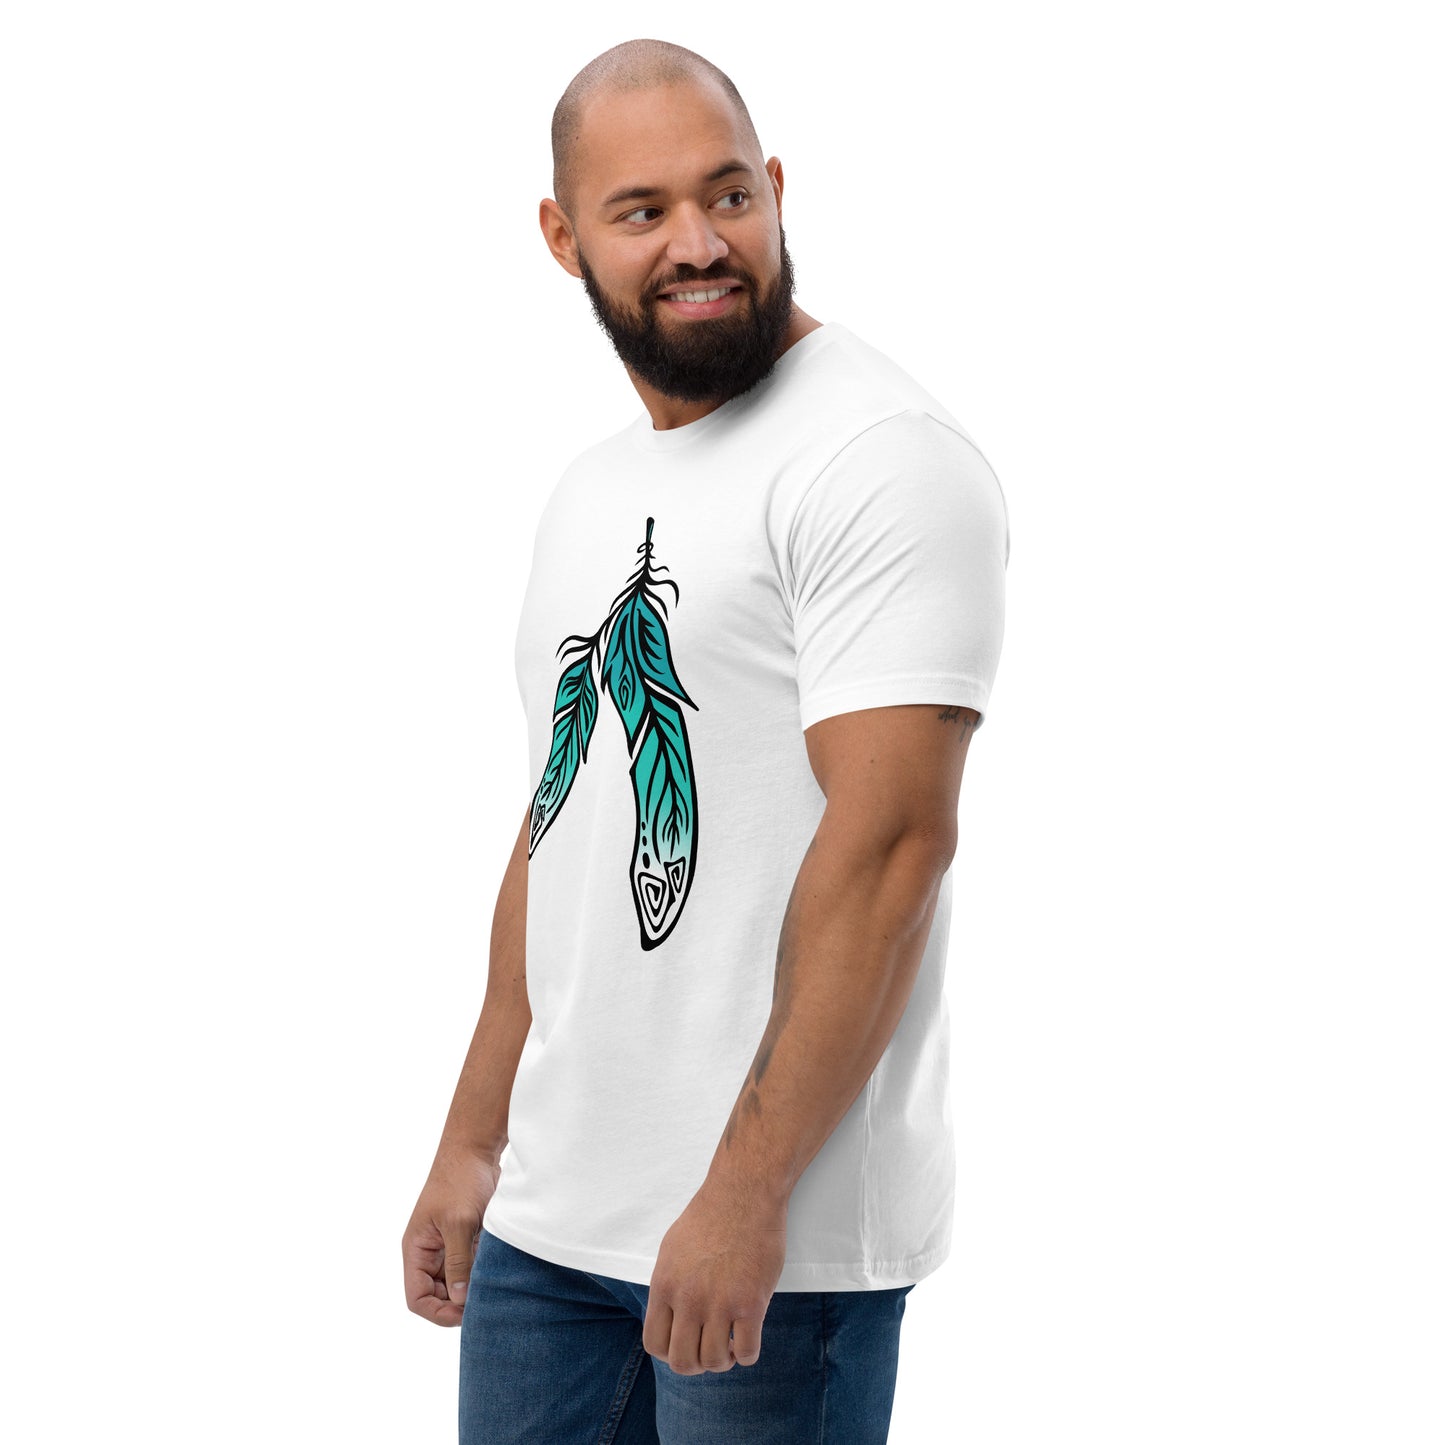 Feather - Men's Fitted Tee